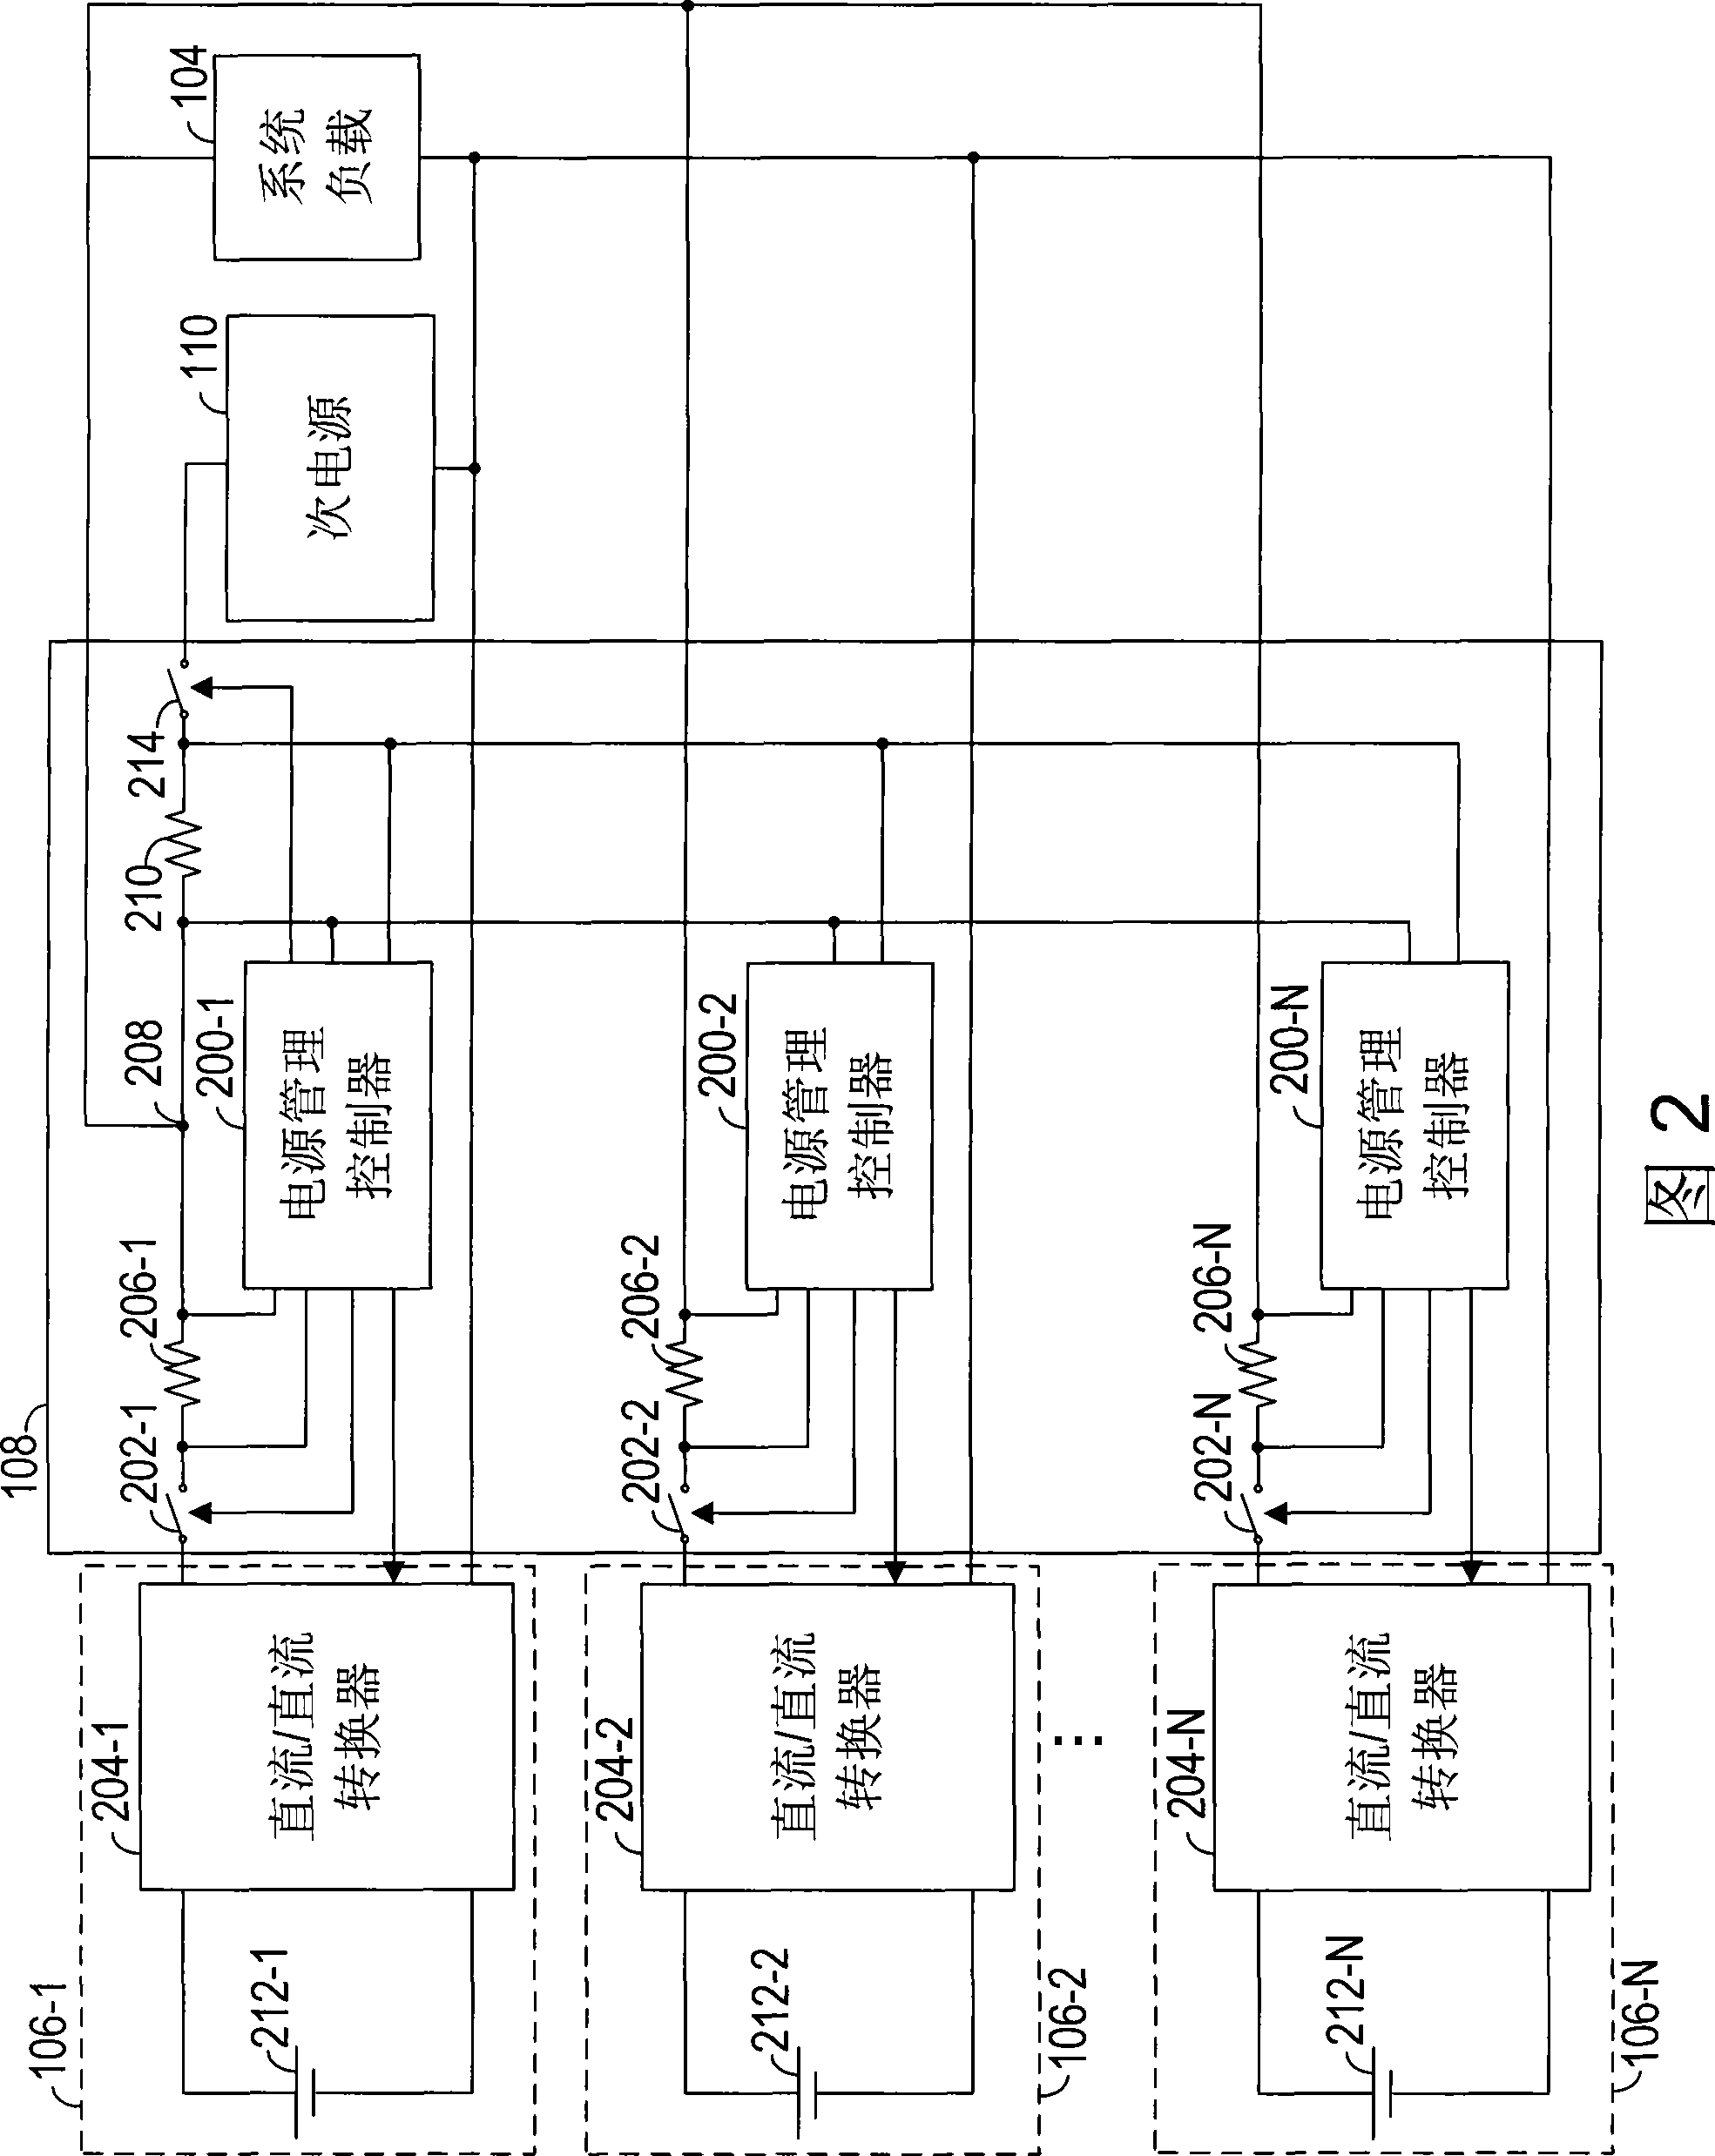 Electronic system and its power management method